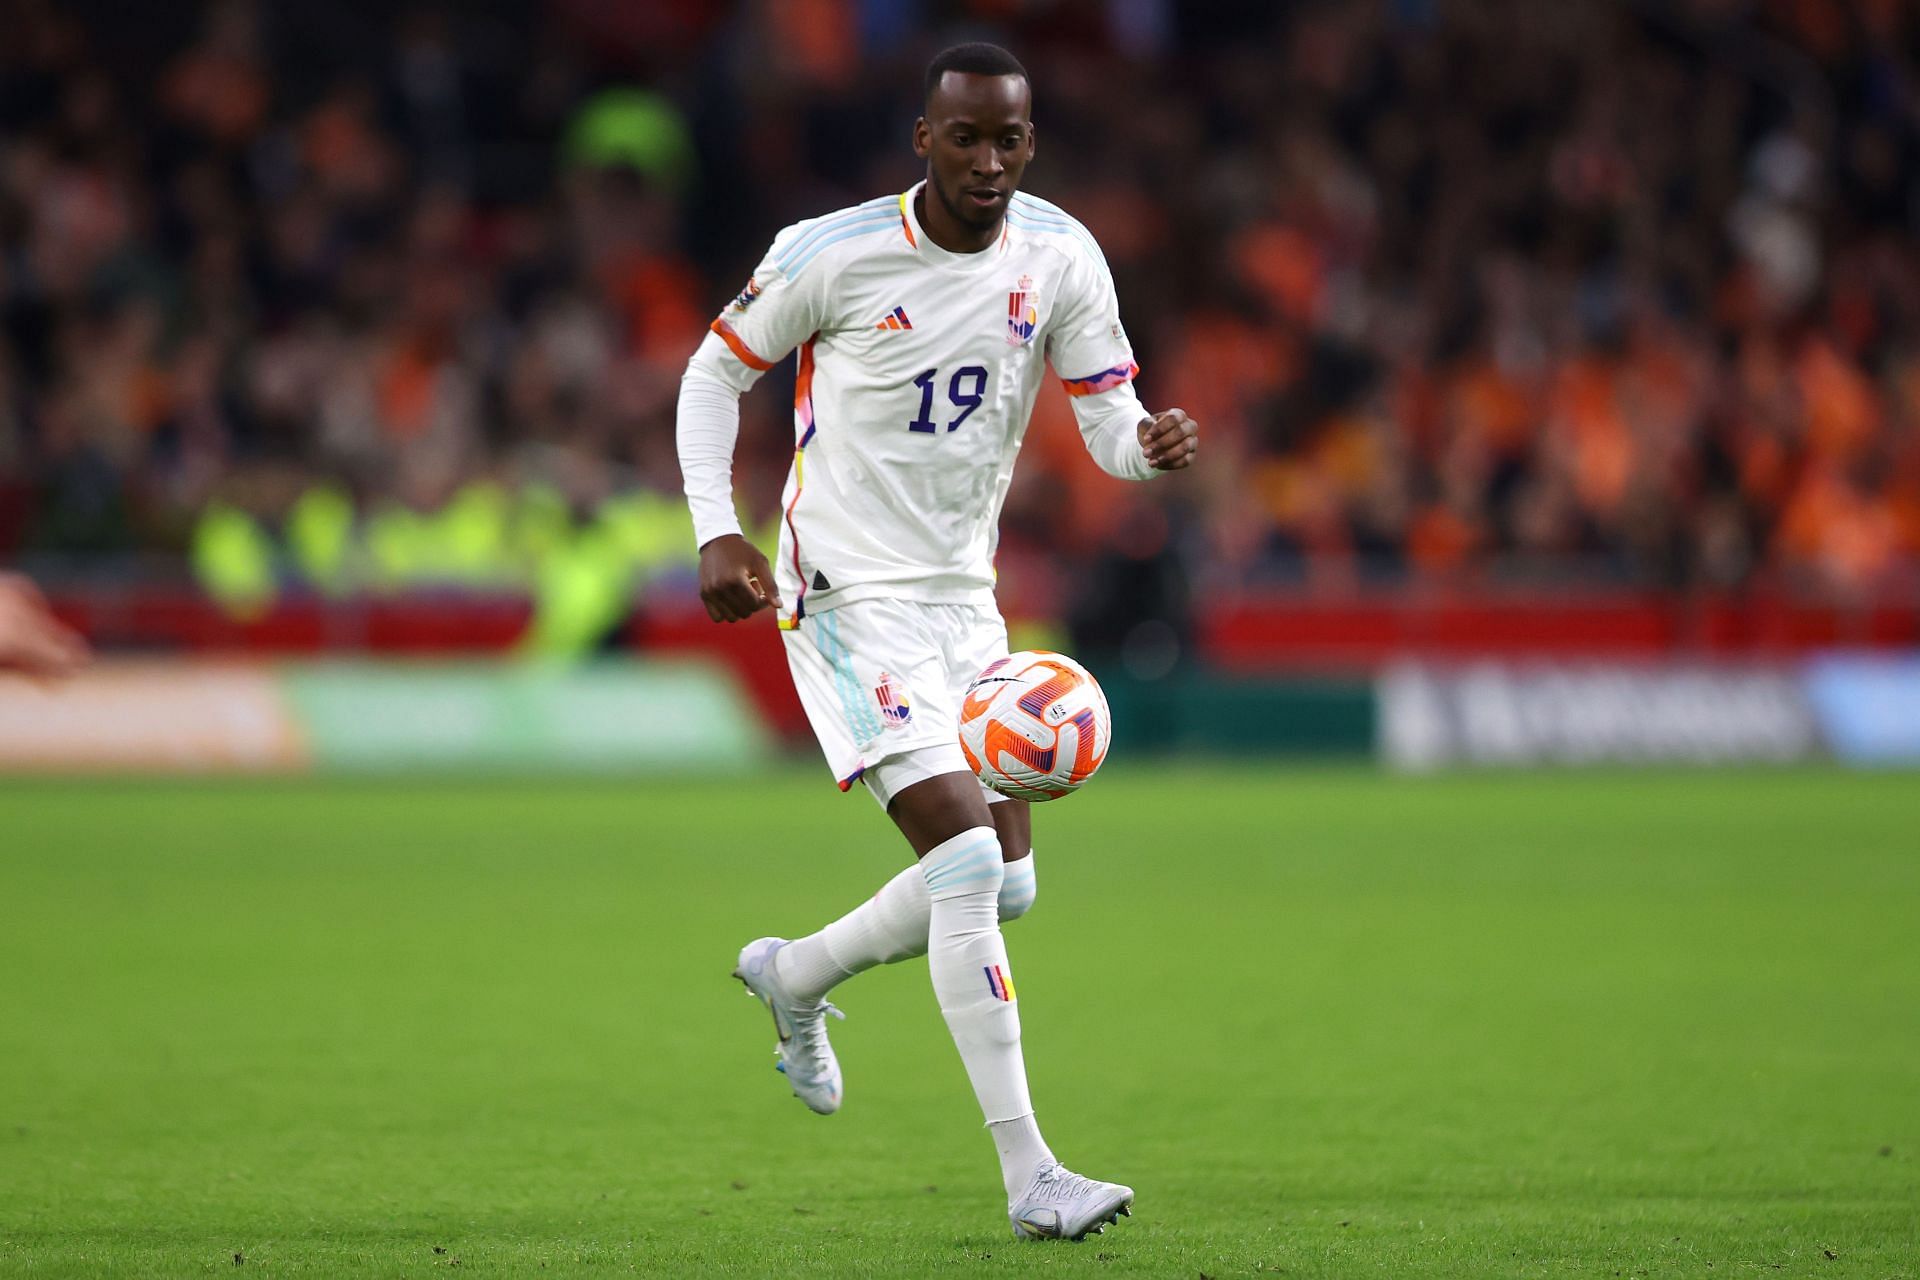 Lukebakio in action against Netherlands: UEFA Nations League - League Path Group 4